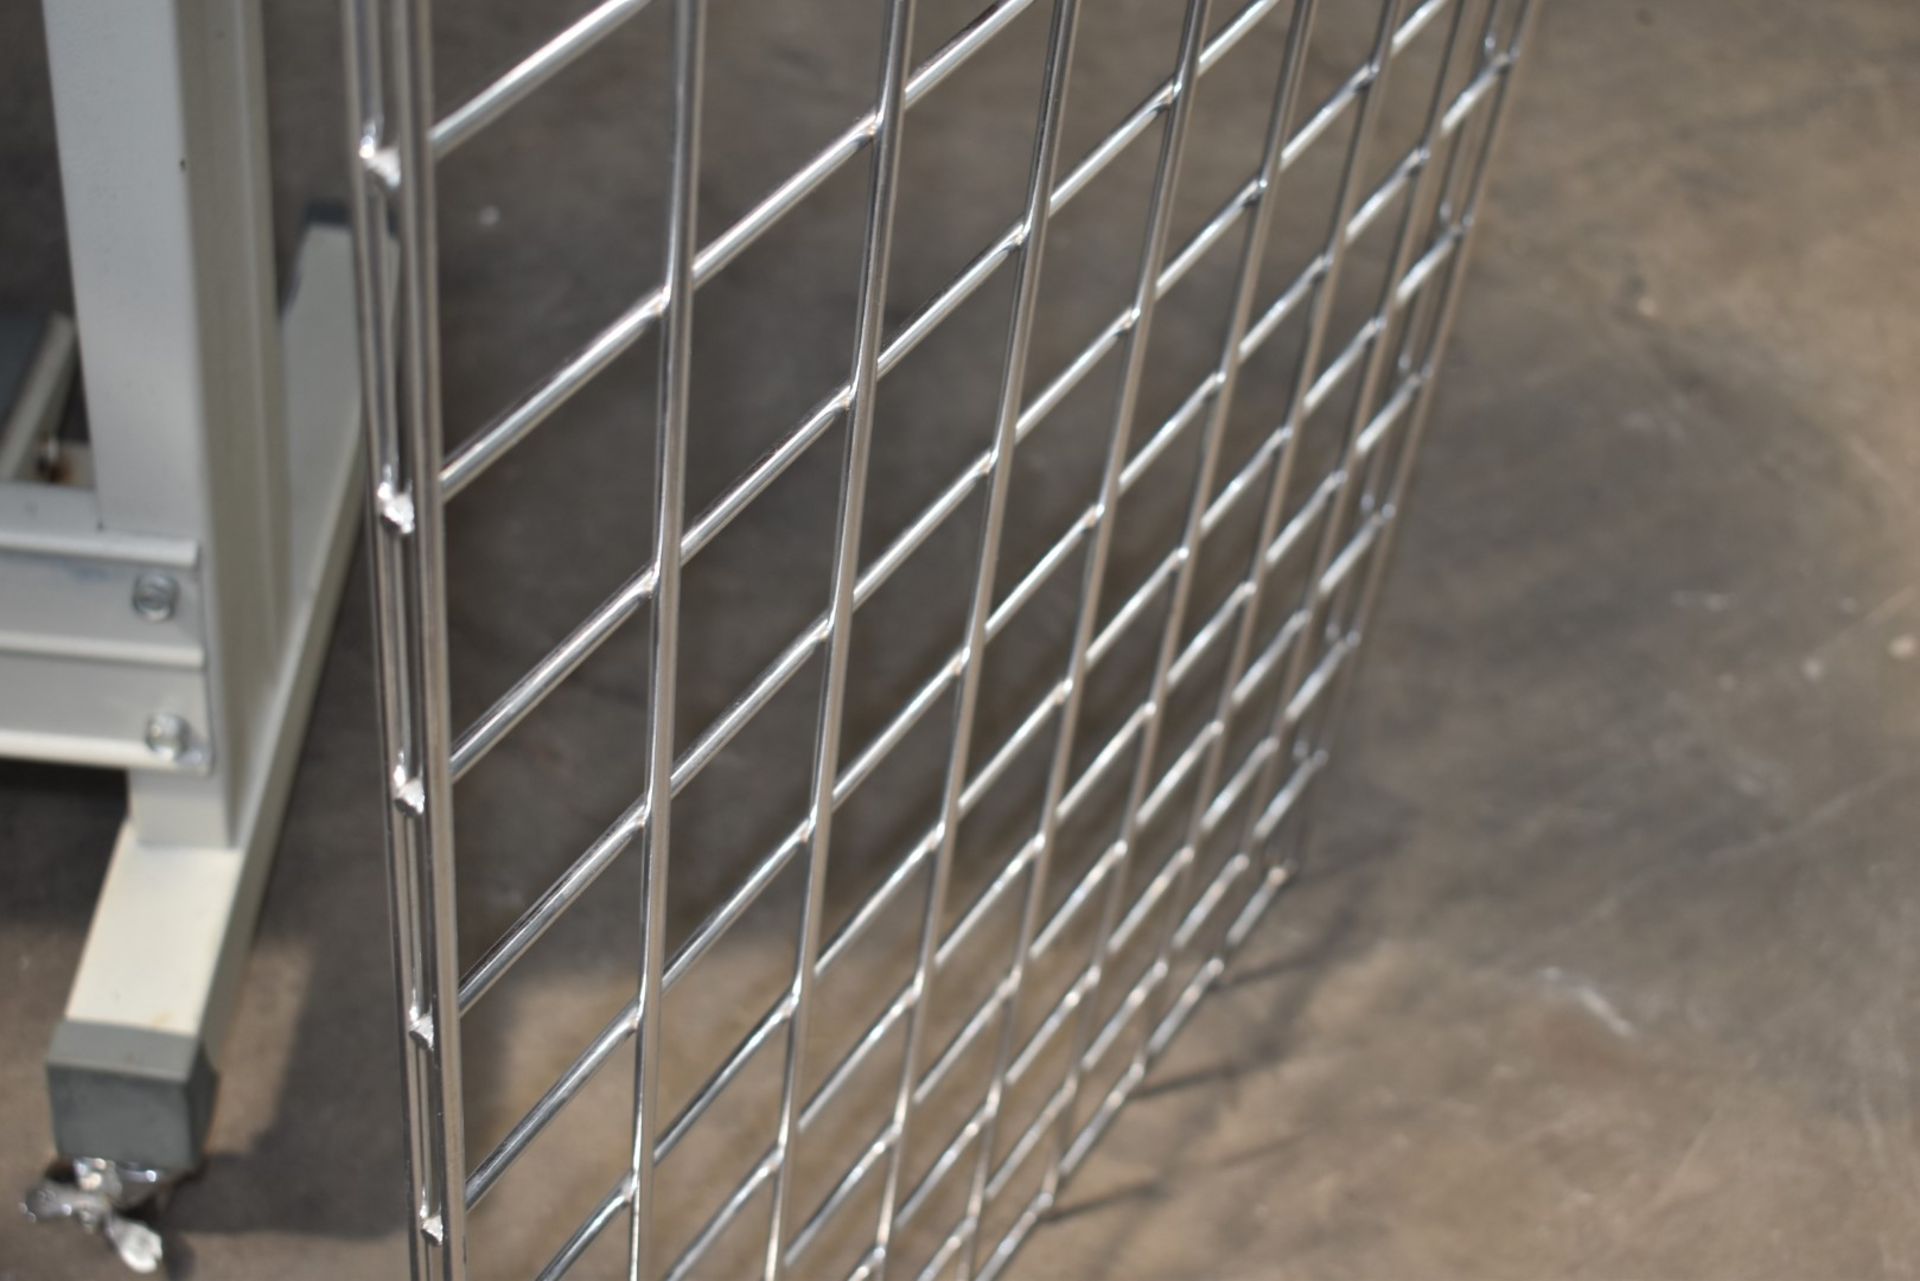 6 x Gridwall Mesh Wall Panels - Heavy Metal Construction With Chrome - Ideal For Creating Pet Cages! - Image 7 of 7